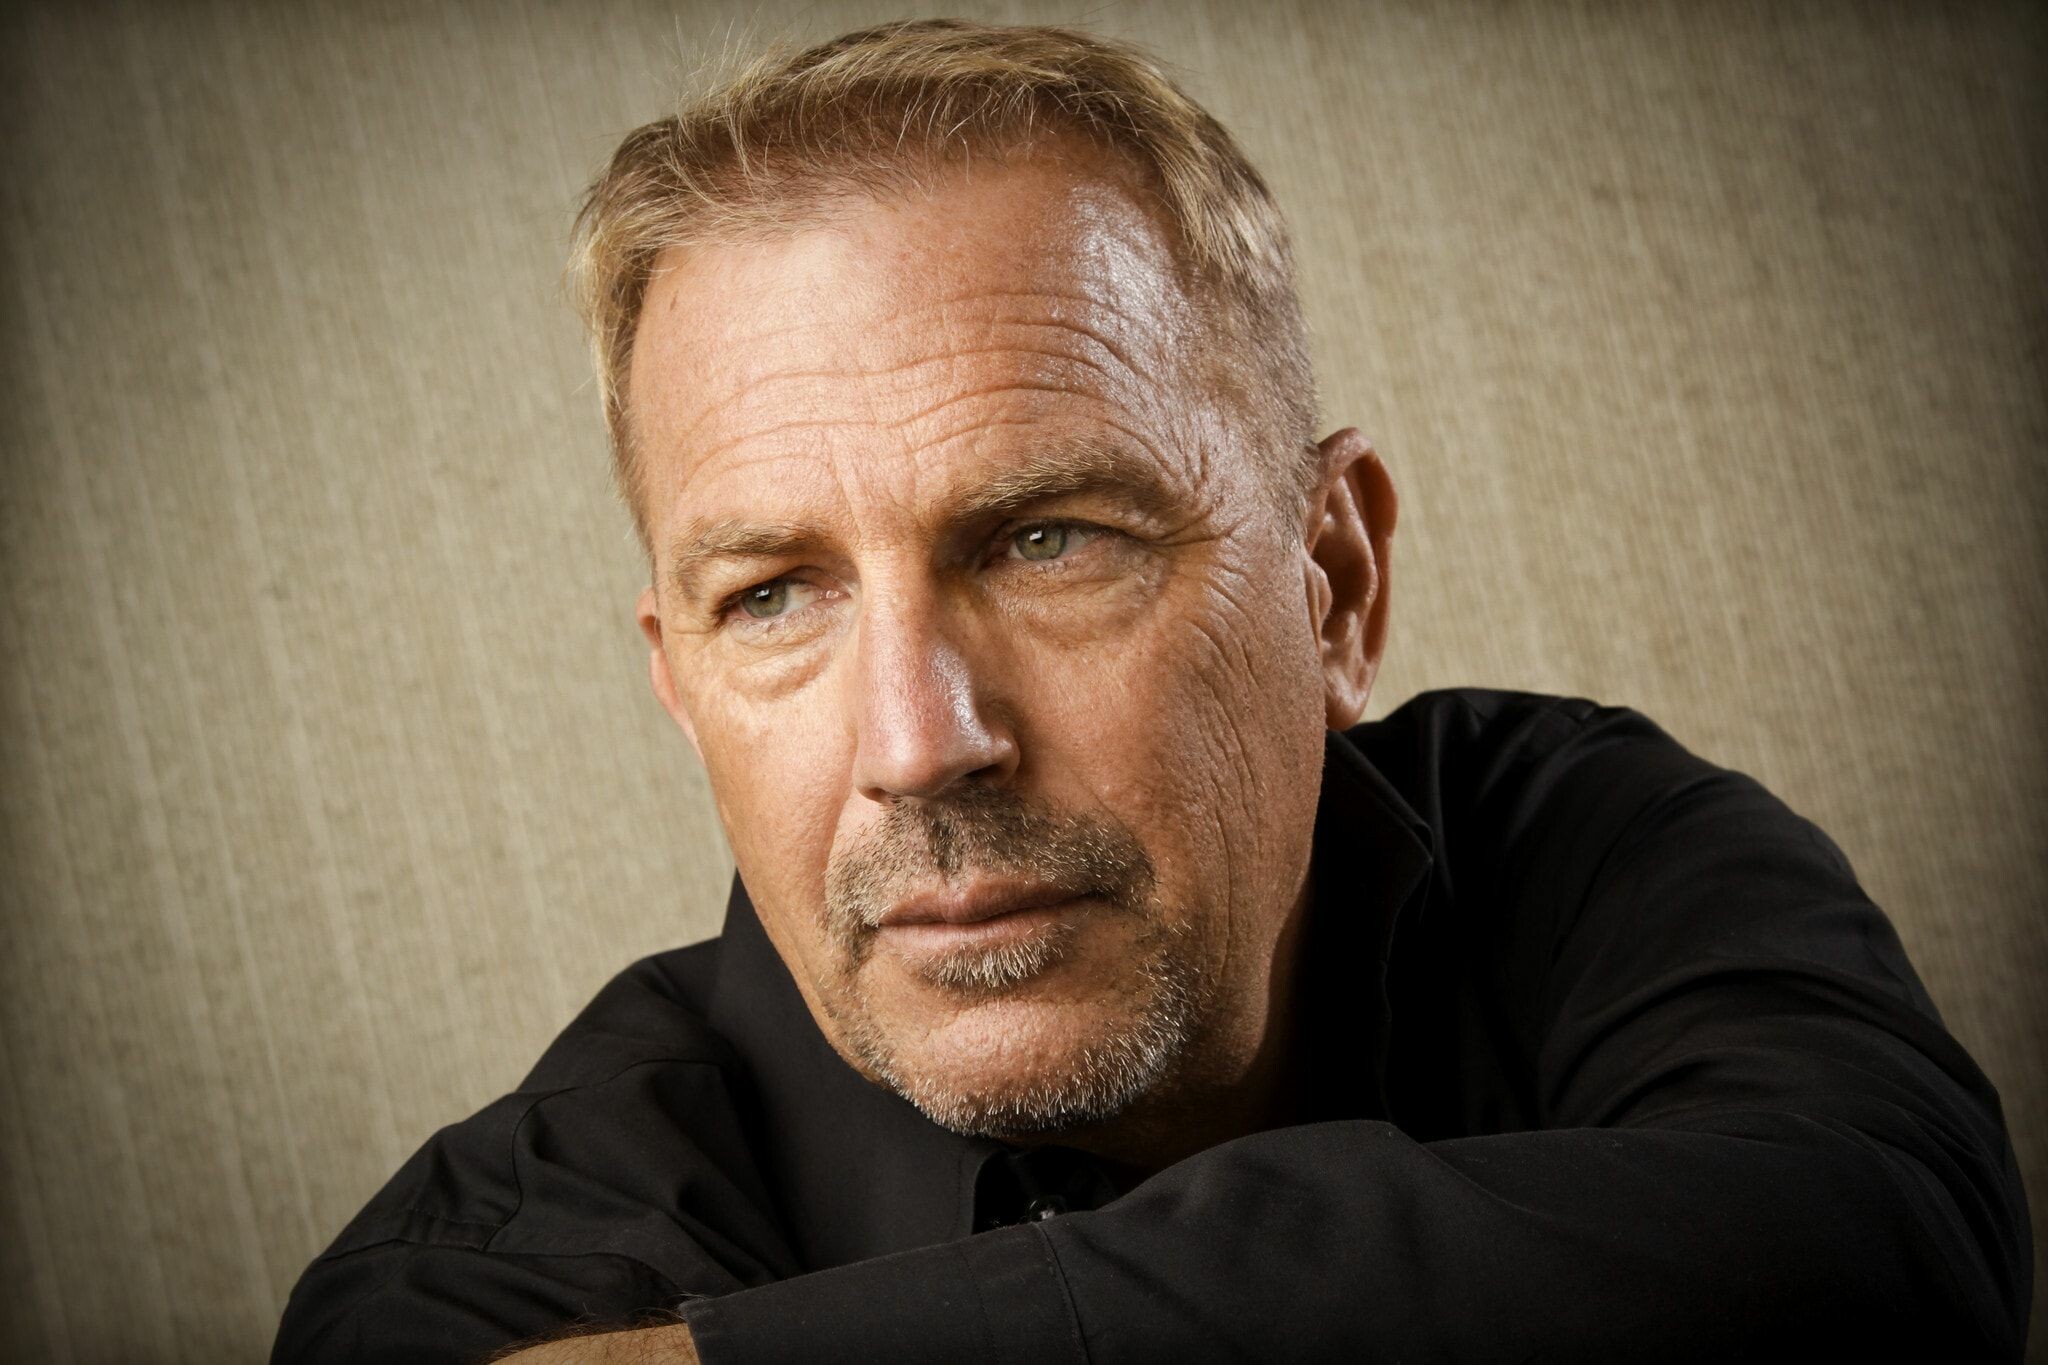 Yellowstone (TV Series): Kevin Costner, An American actor, Two Golden Globe Awards. 2050x1370 HD Wallpaper.